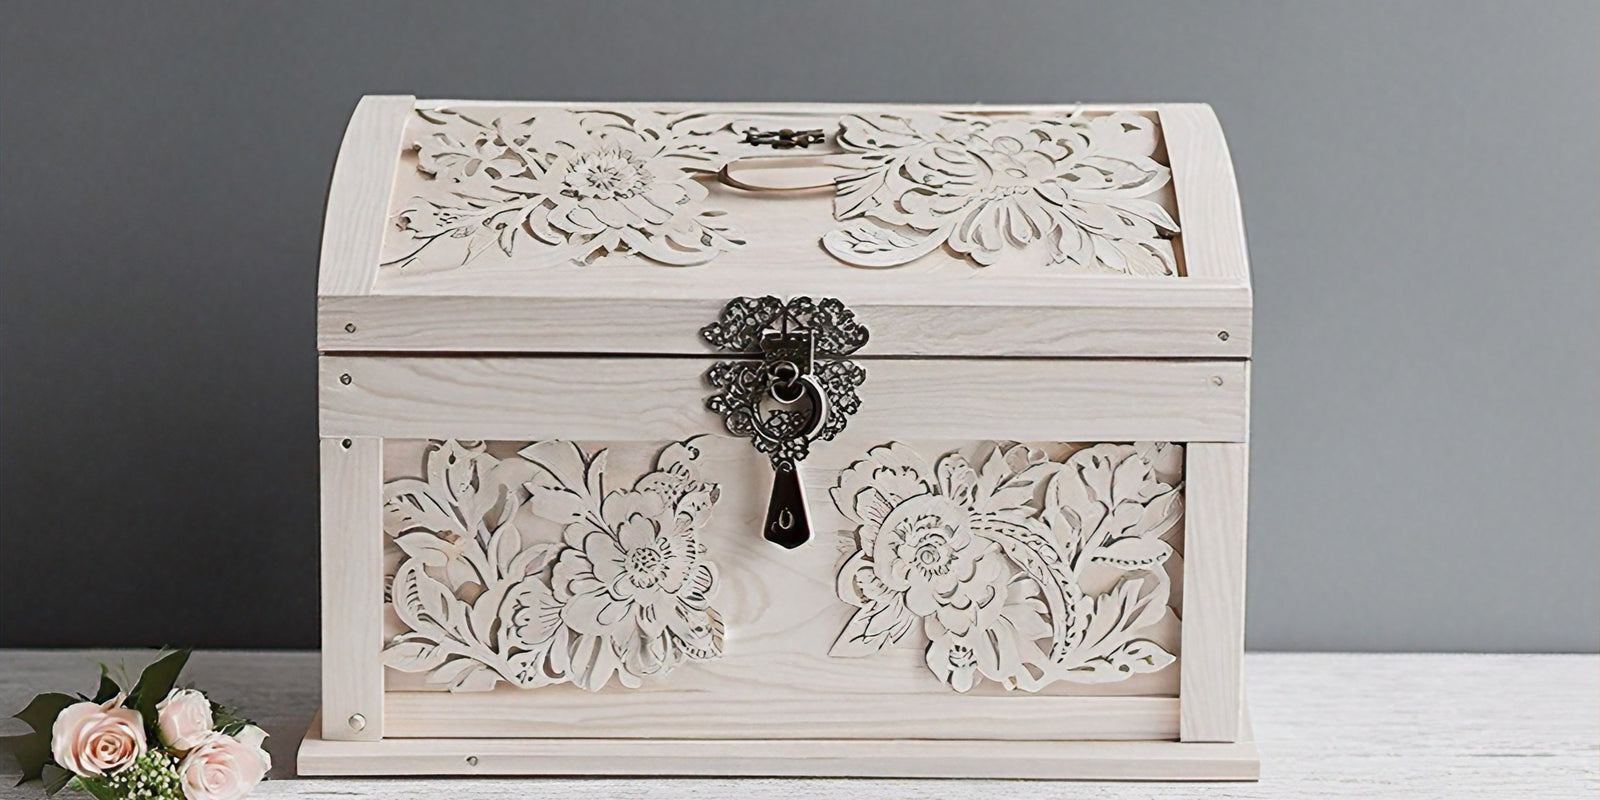 Easy DIY Wedding Card Box Ideas to Add a Personal Touch to Your Big Day